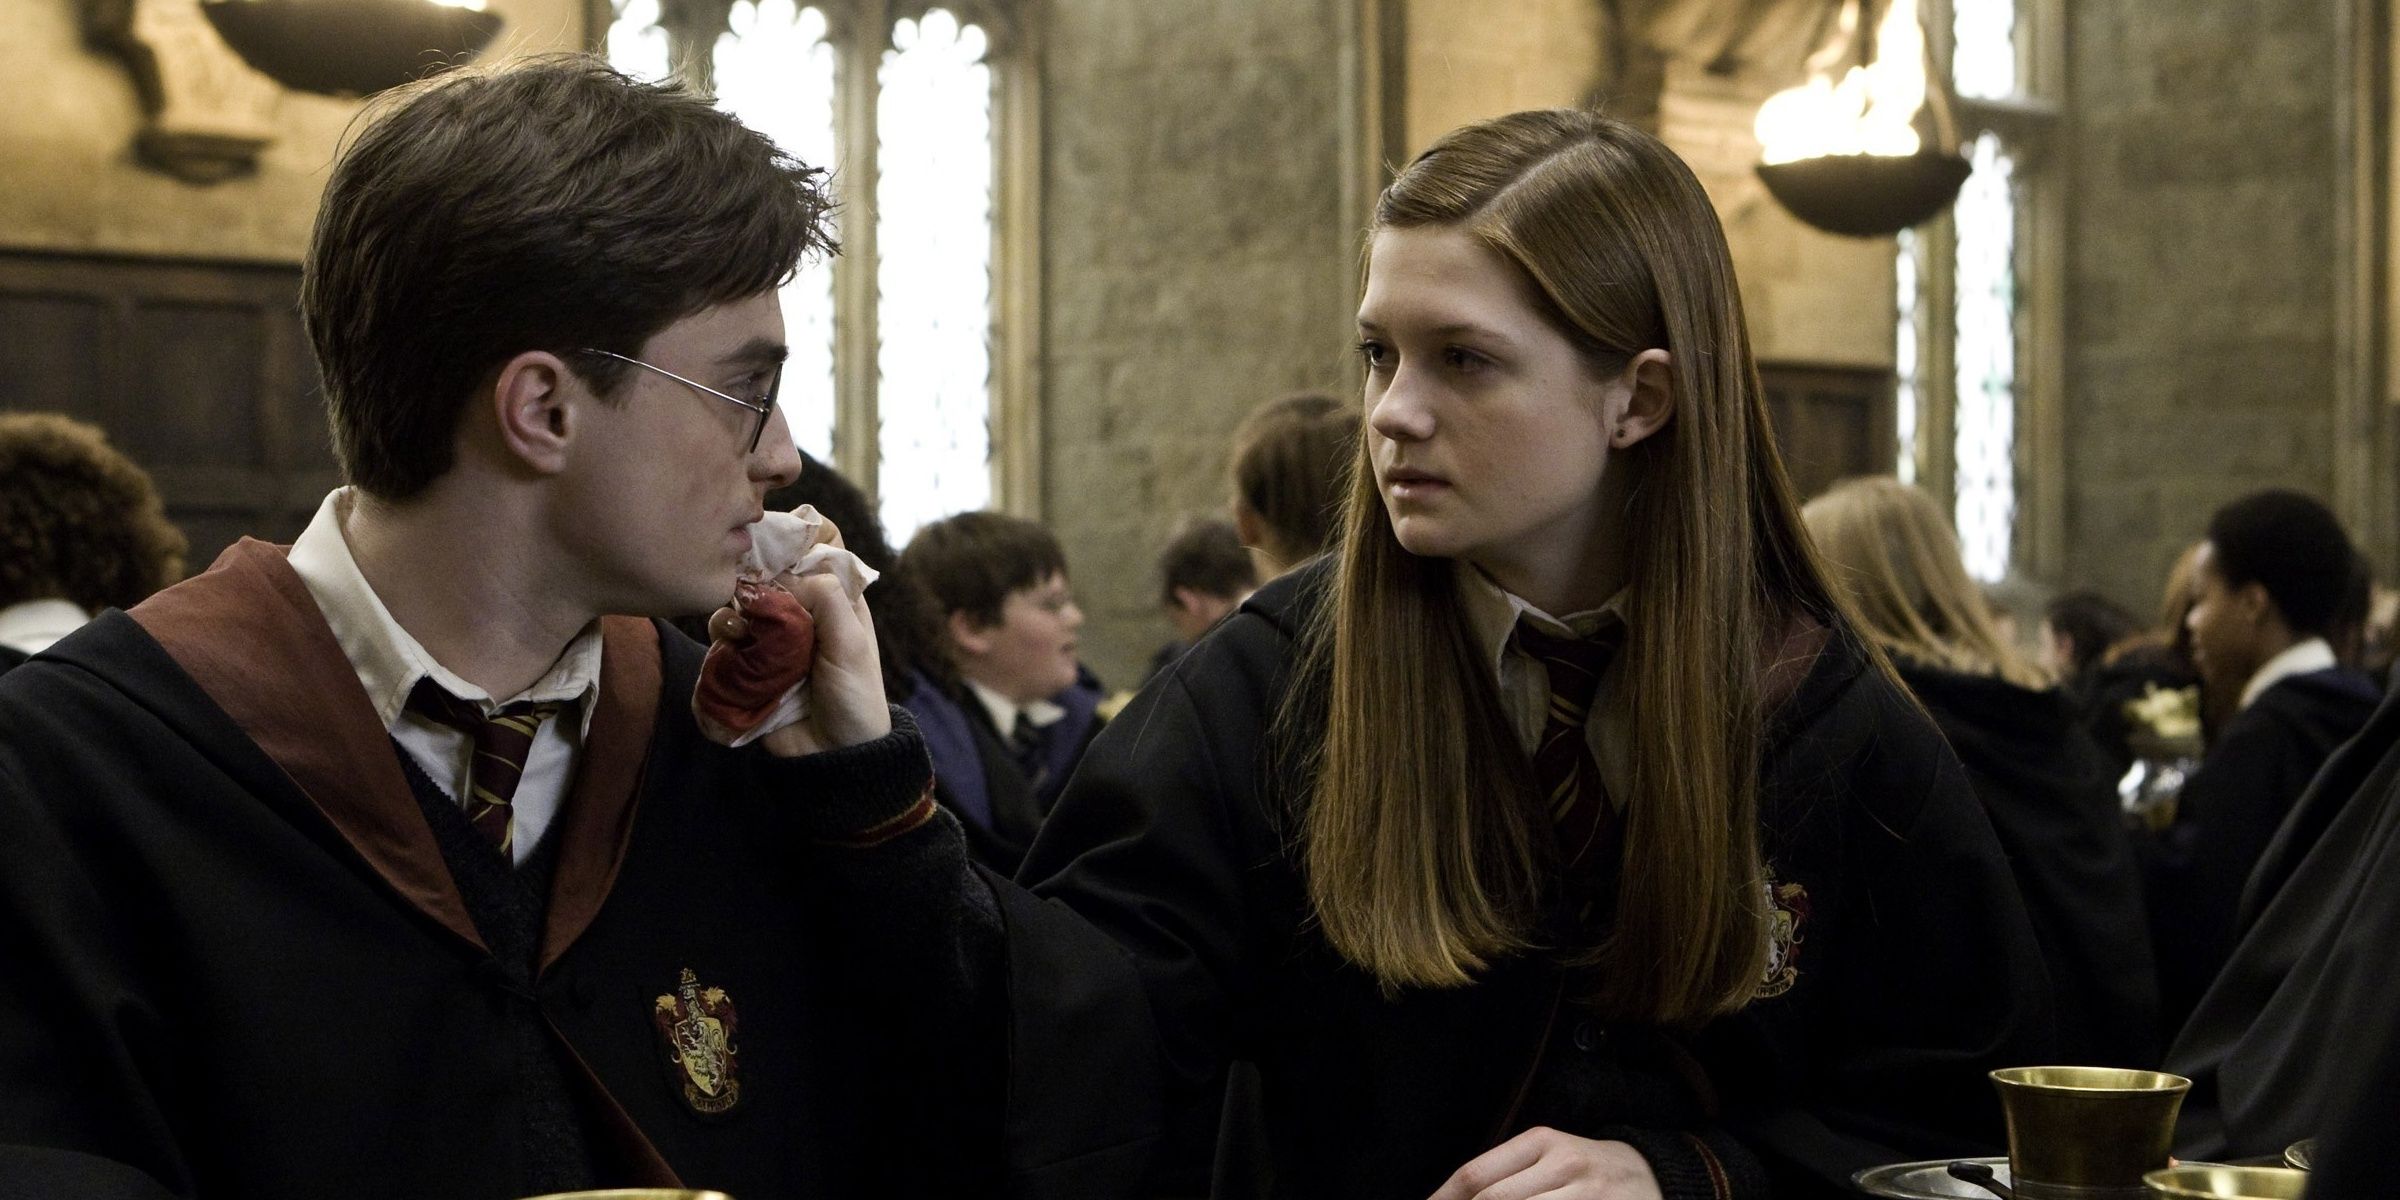 Ginny Weasley sitting next to Harry Potter in the Great Hall of Hogwarts